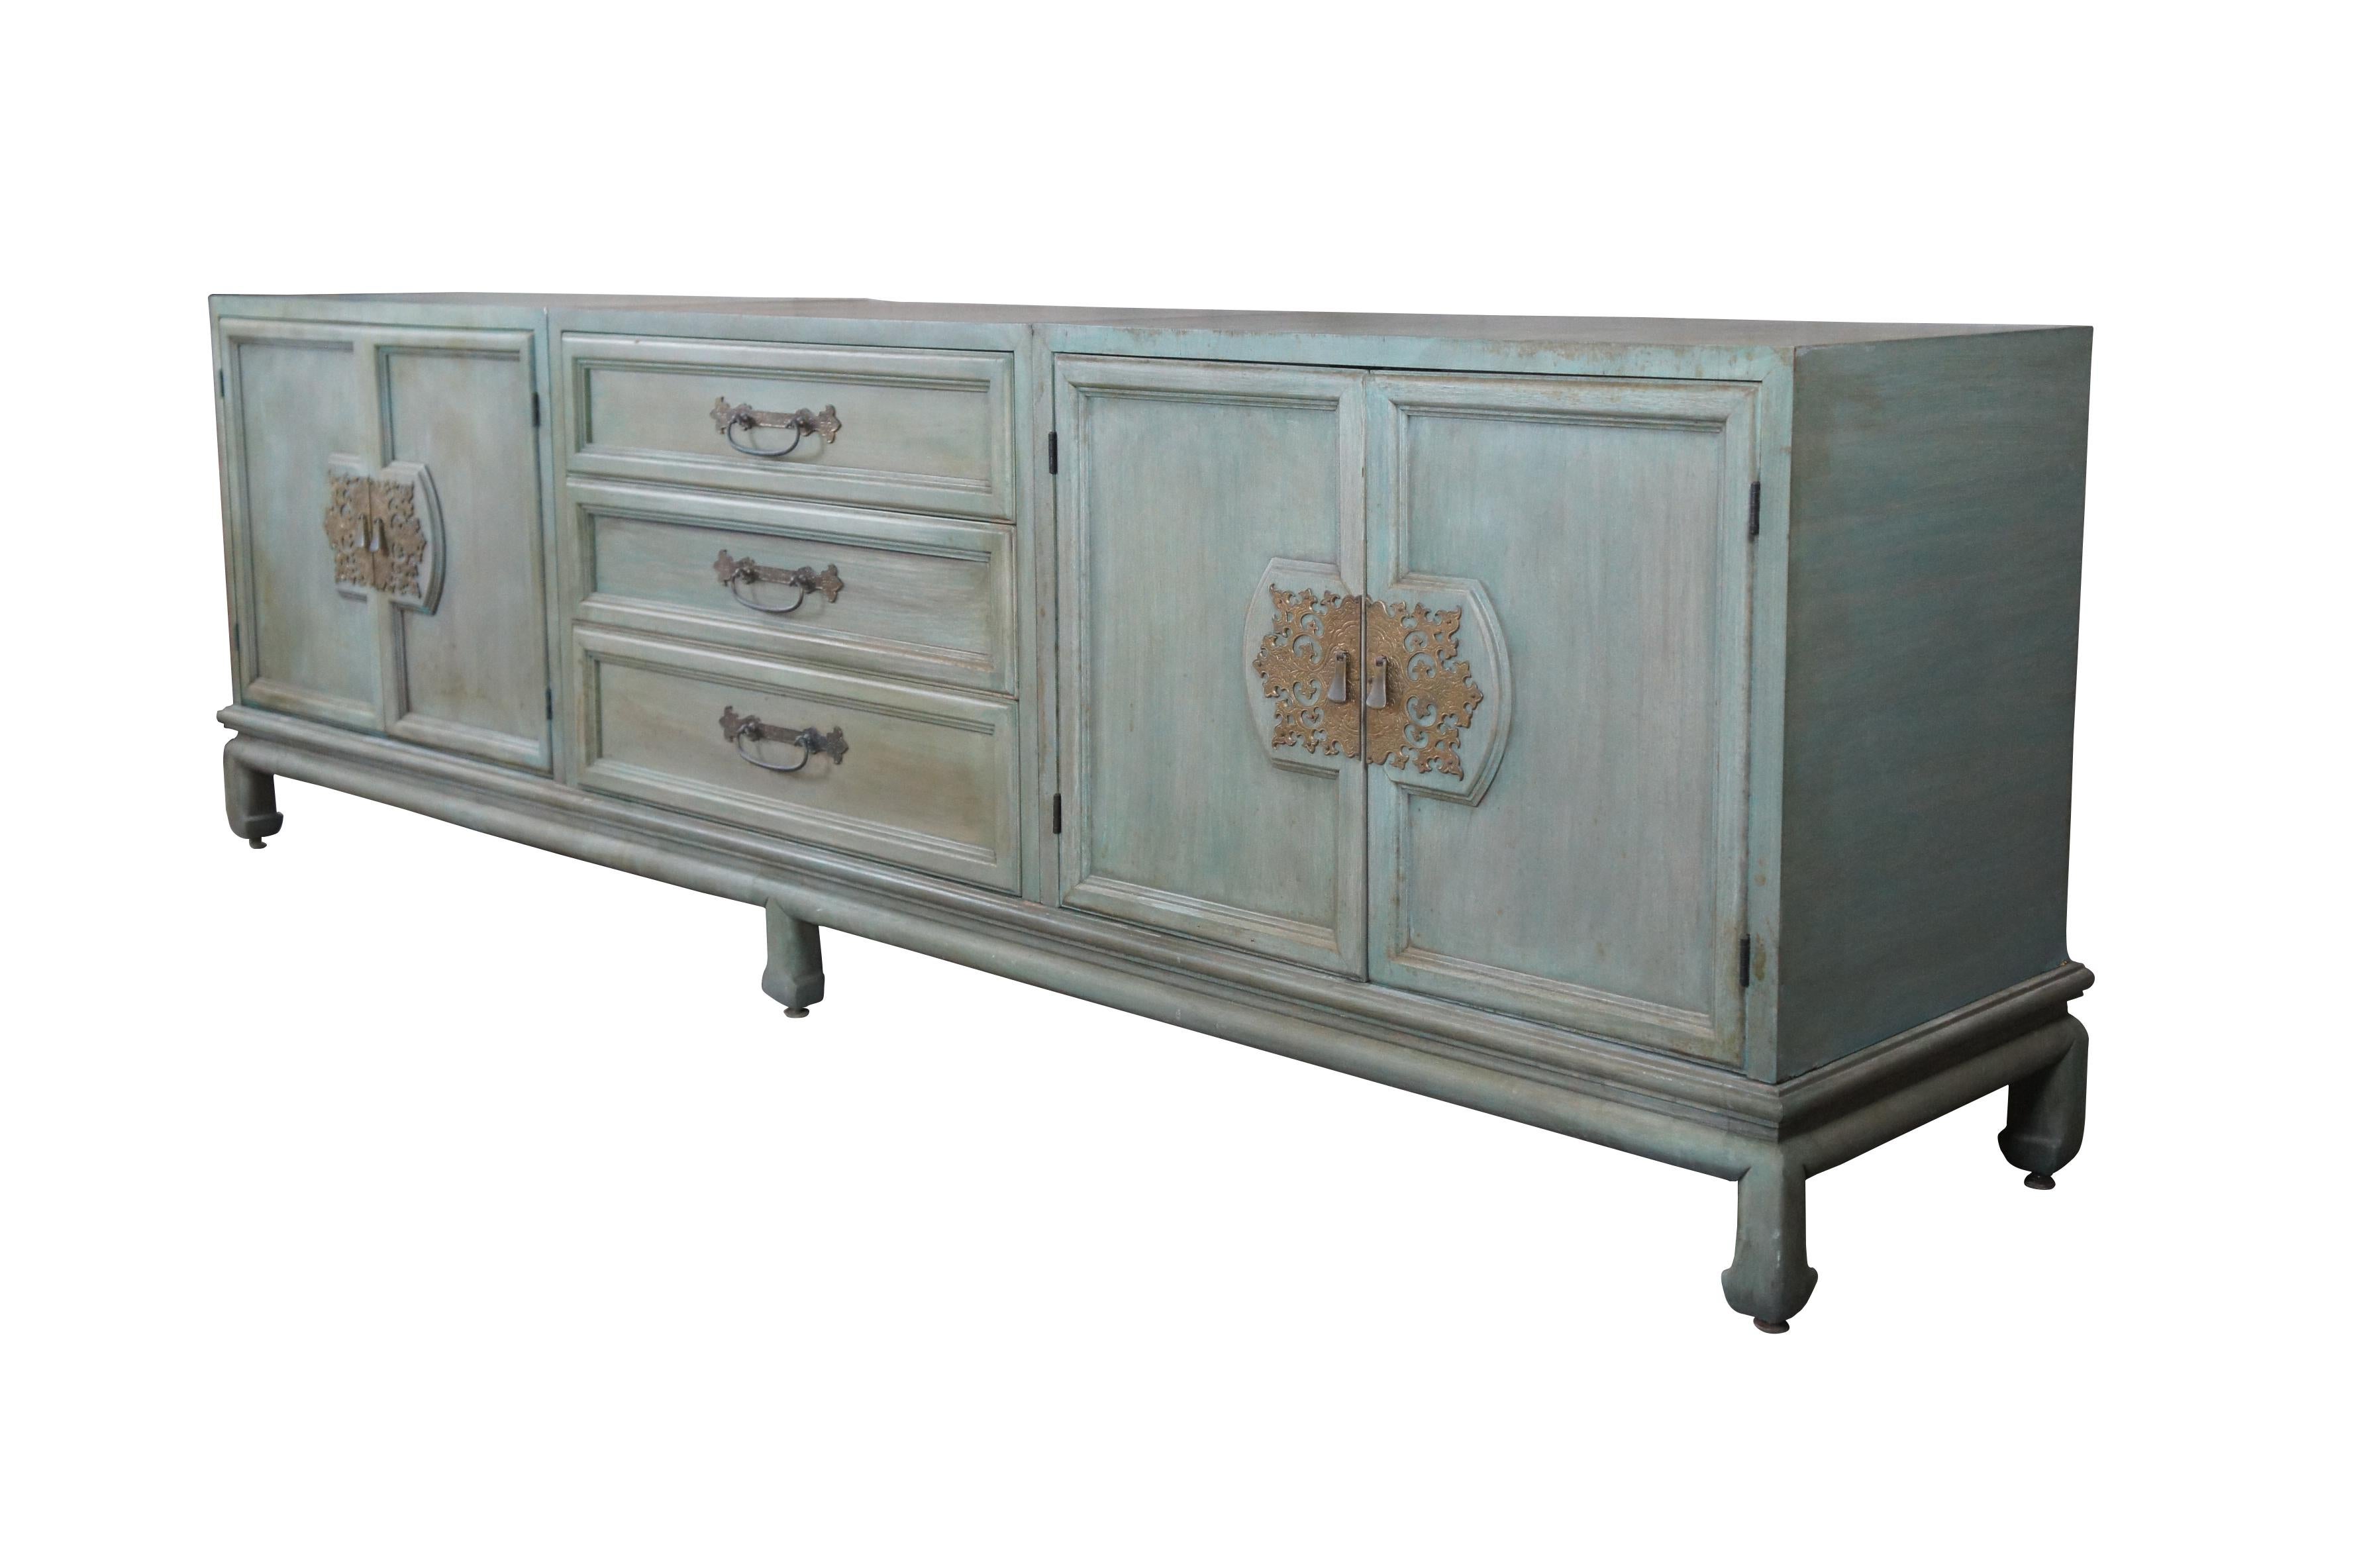 A rare and impressive vintage John Stuart Mid-Century Modern chinoiserie 3 piece credenza, dresser or media cabinet. A rectangular form made from mahogany with a green painted finish and brass hardware. Features a central chest of three dovetailed